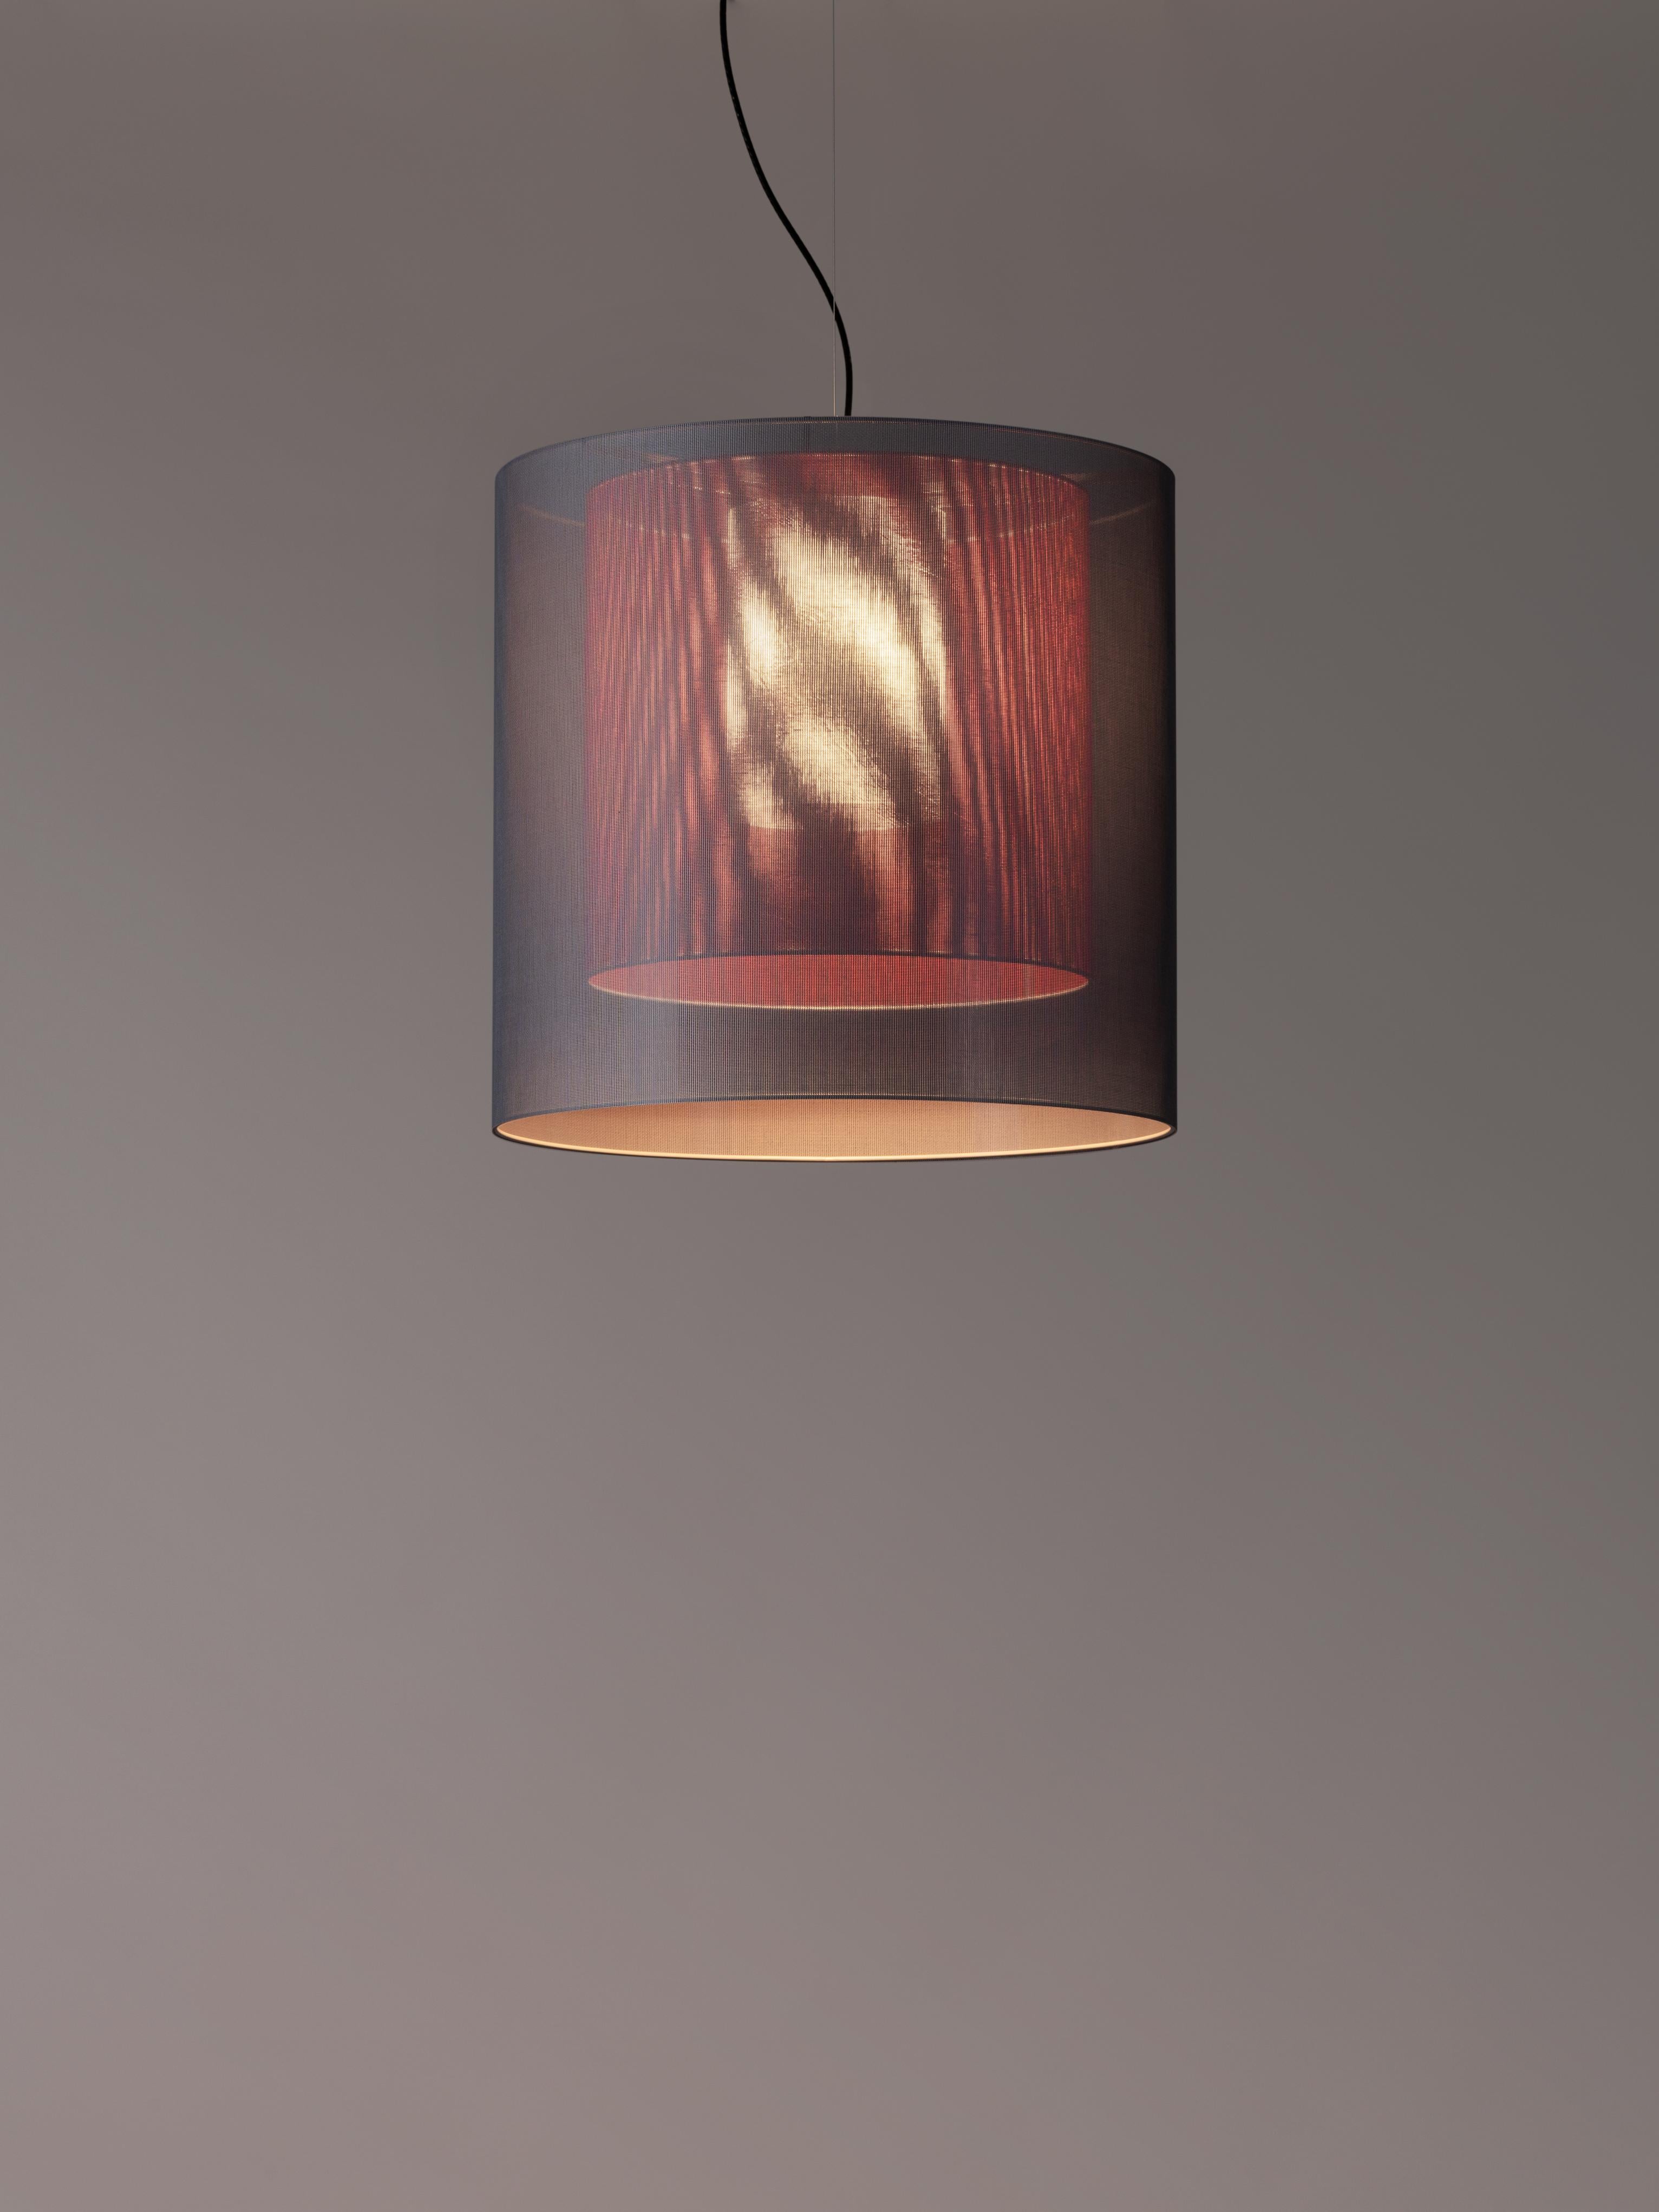 Grey and Red Moaré LM pendant lamp by Antoni Arola
Dimensions: D 62 x H 60 cm
Materials: Metal, polyester.
Available in other colors and sizes.

Moaré’s multiple combinations of formats and colours make it highly versatile. The series takes its